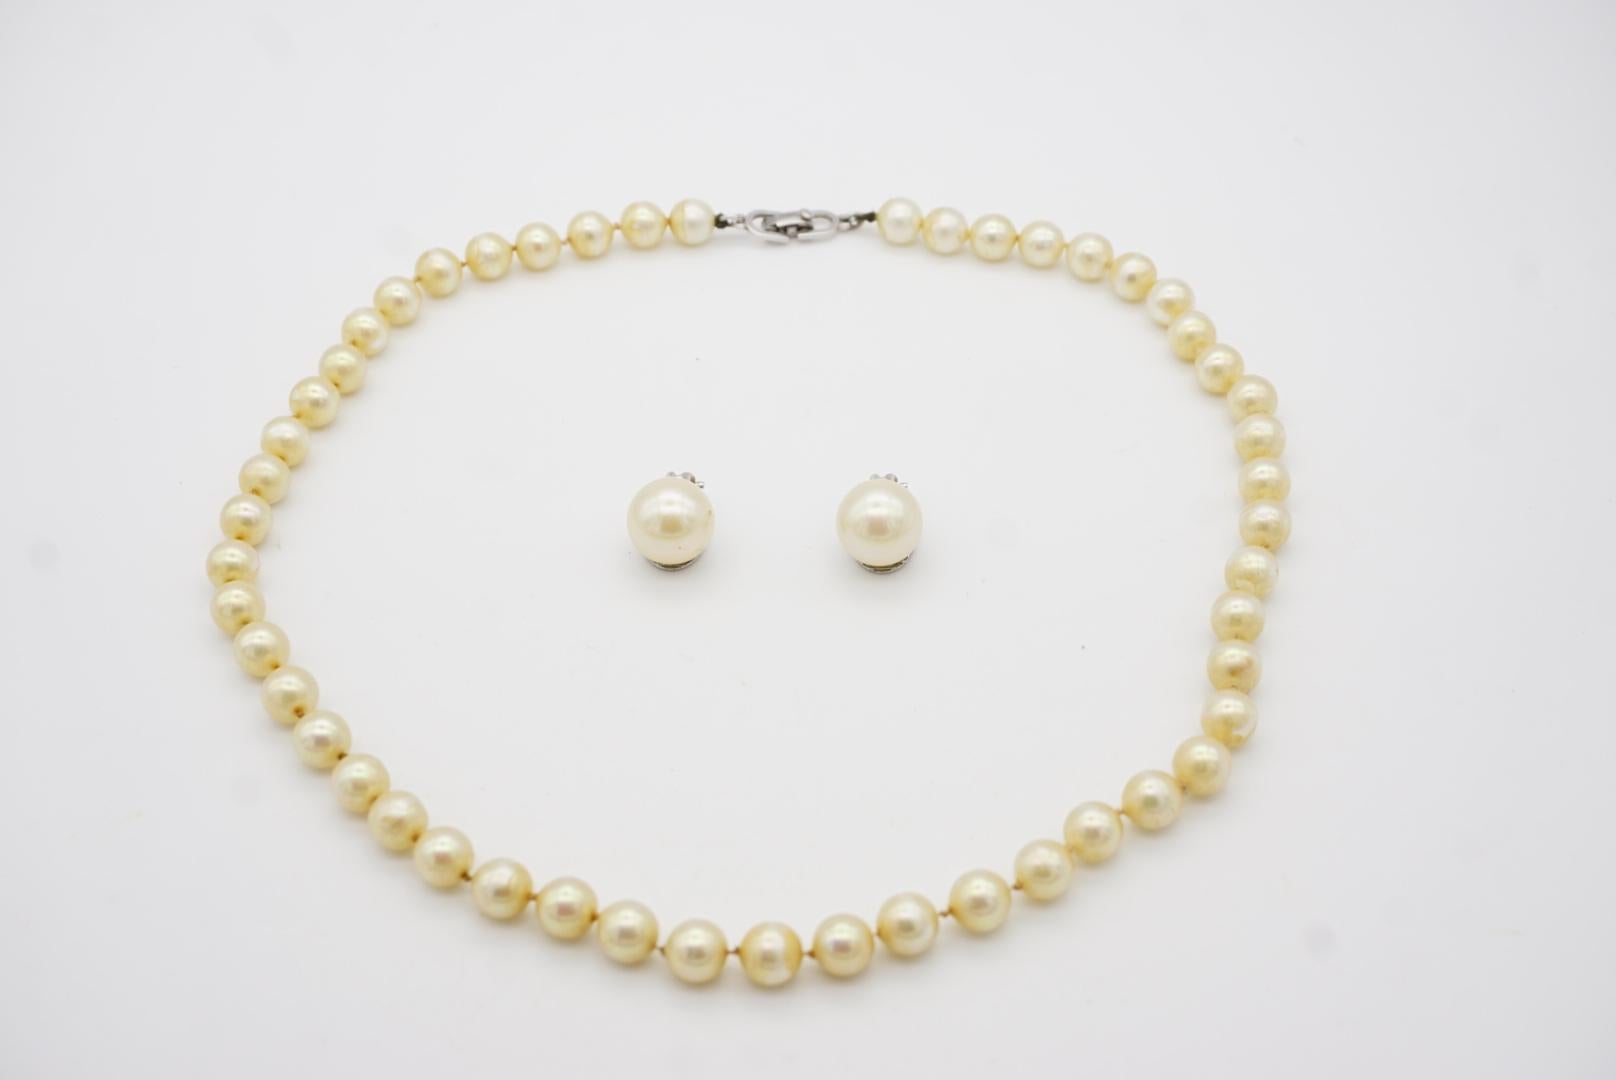 Christian Dior Vintage 1980s White Round Pearls Set Silver Necklace Earrings For Sale 1